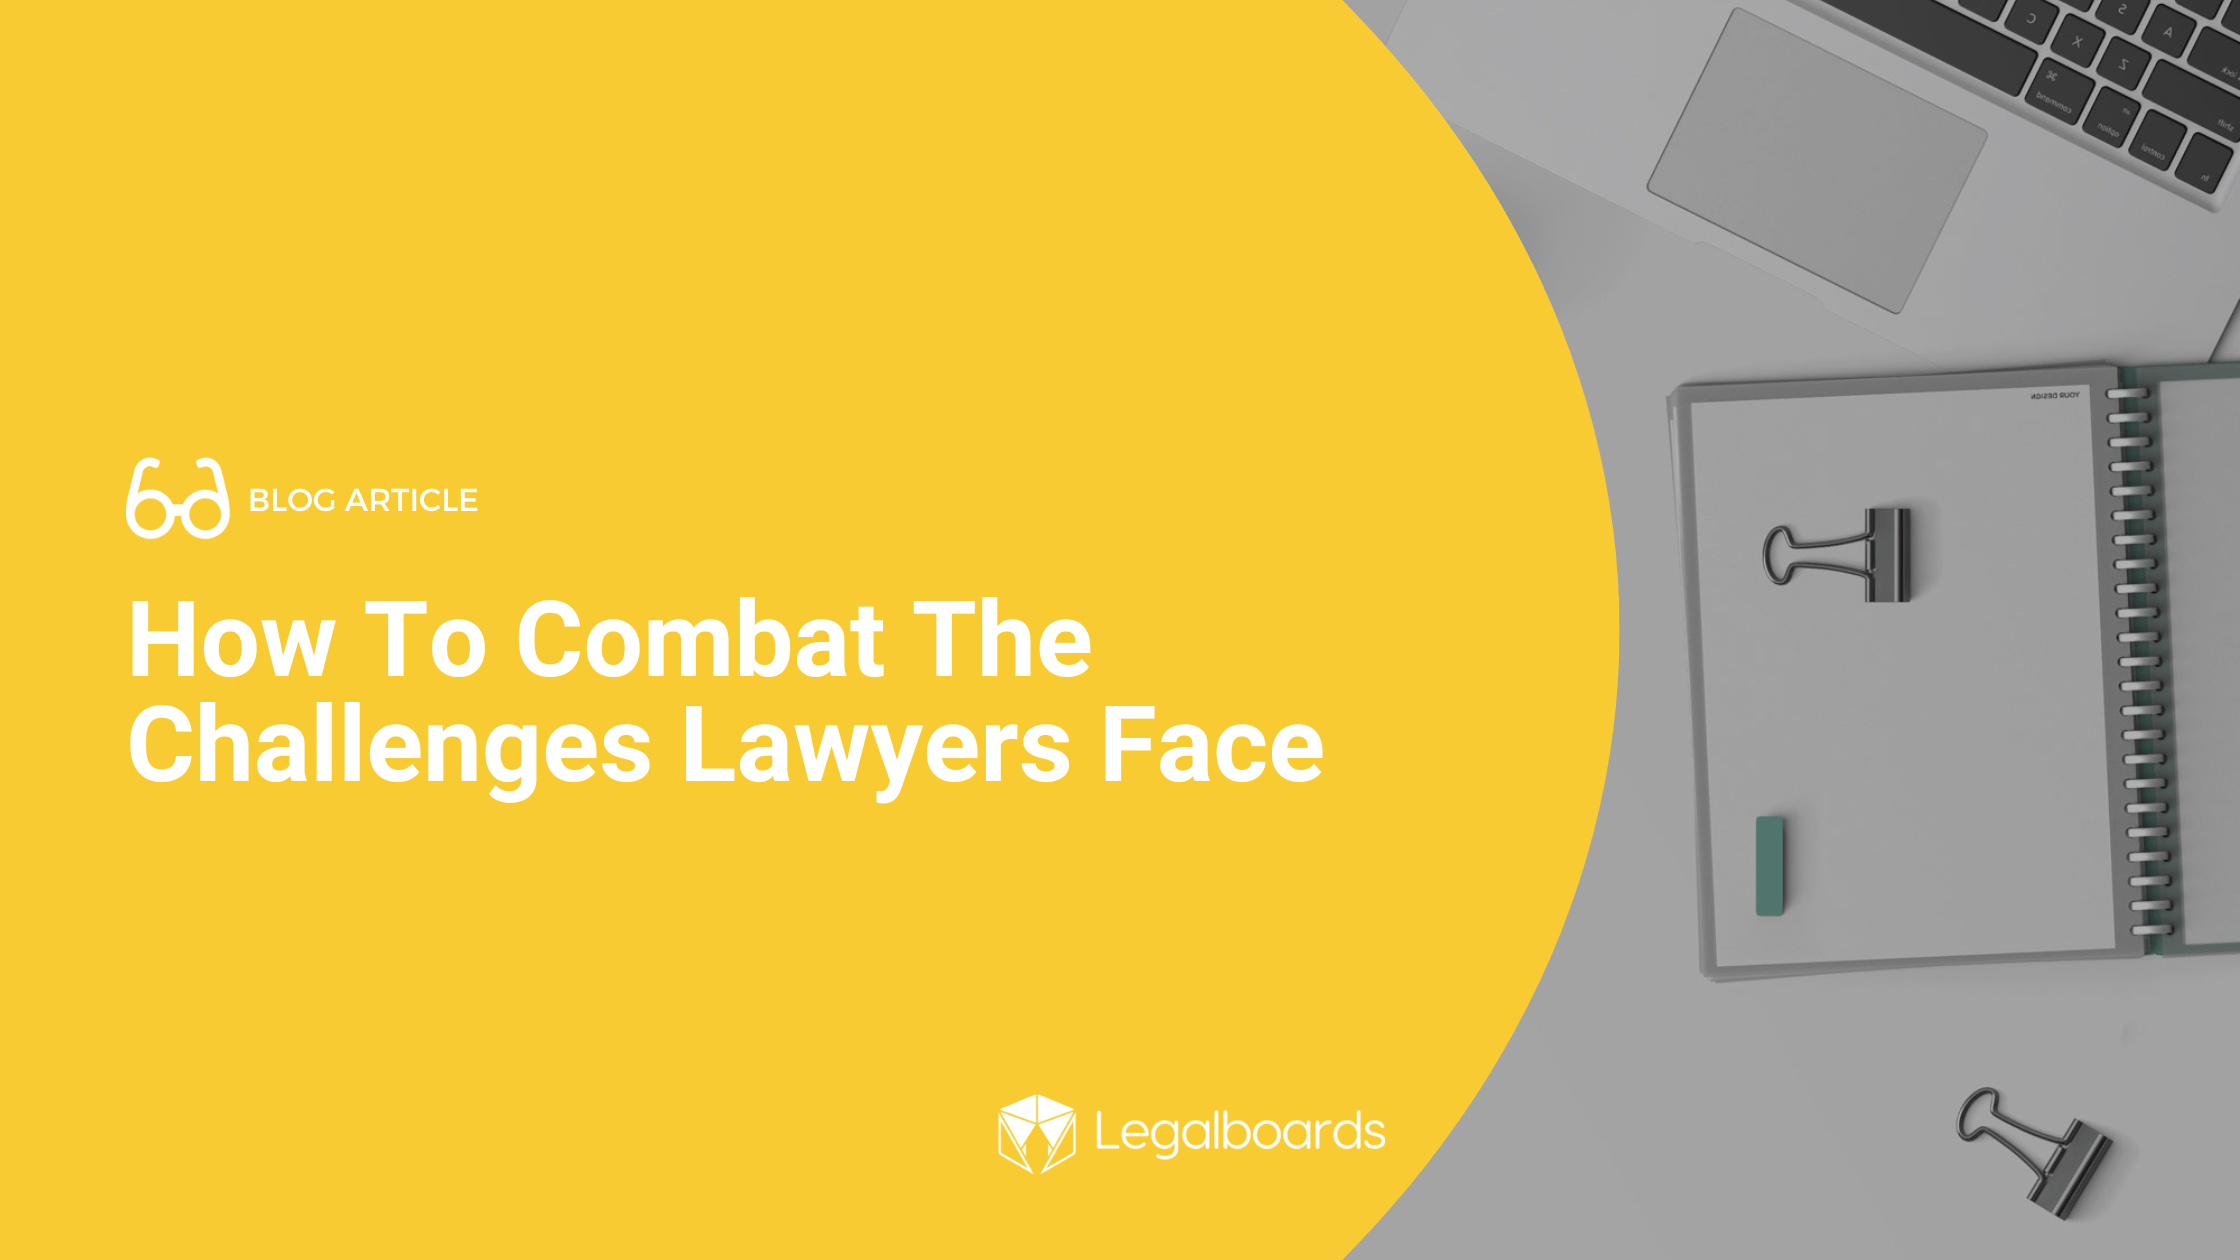 How To Combat The Challenges That Lawyers Face